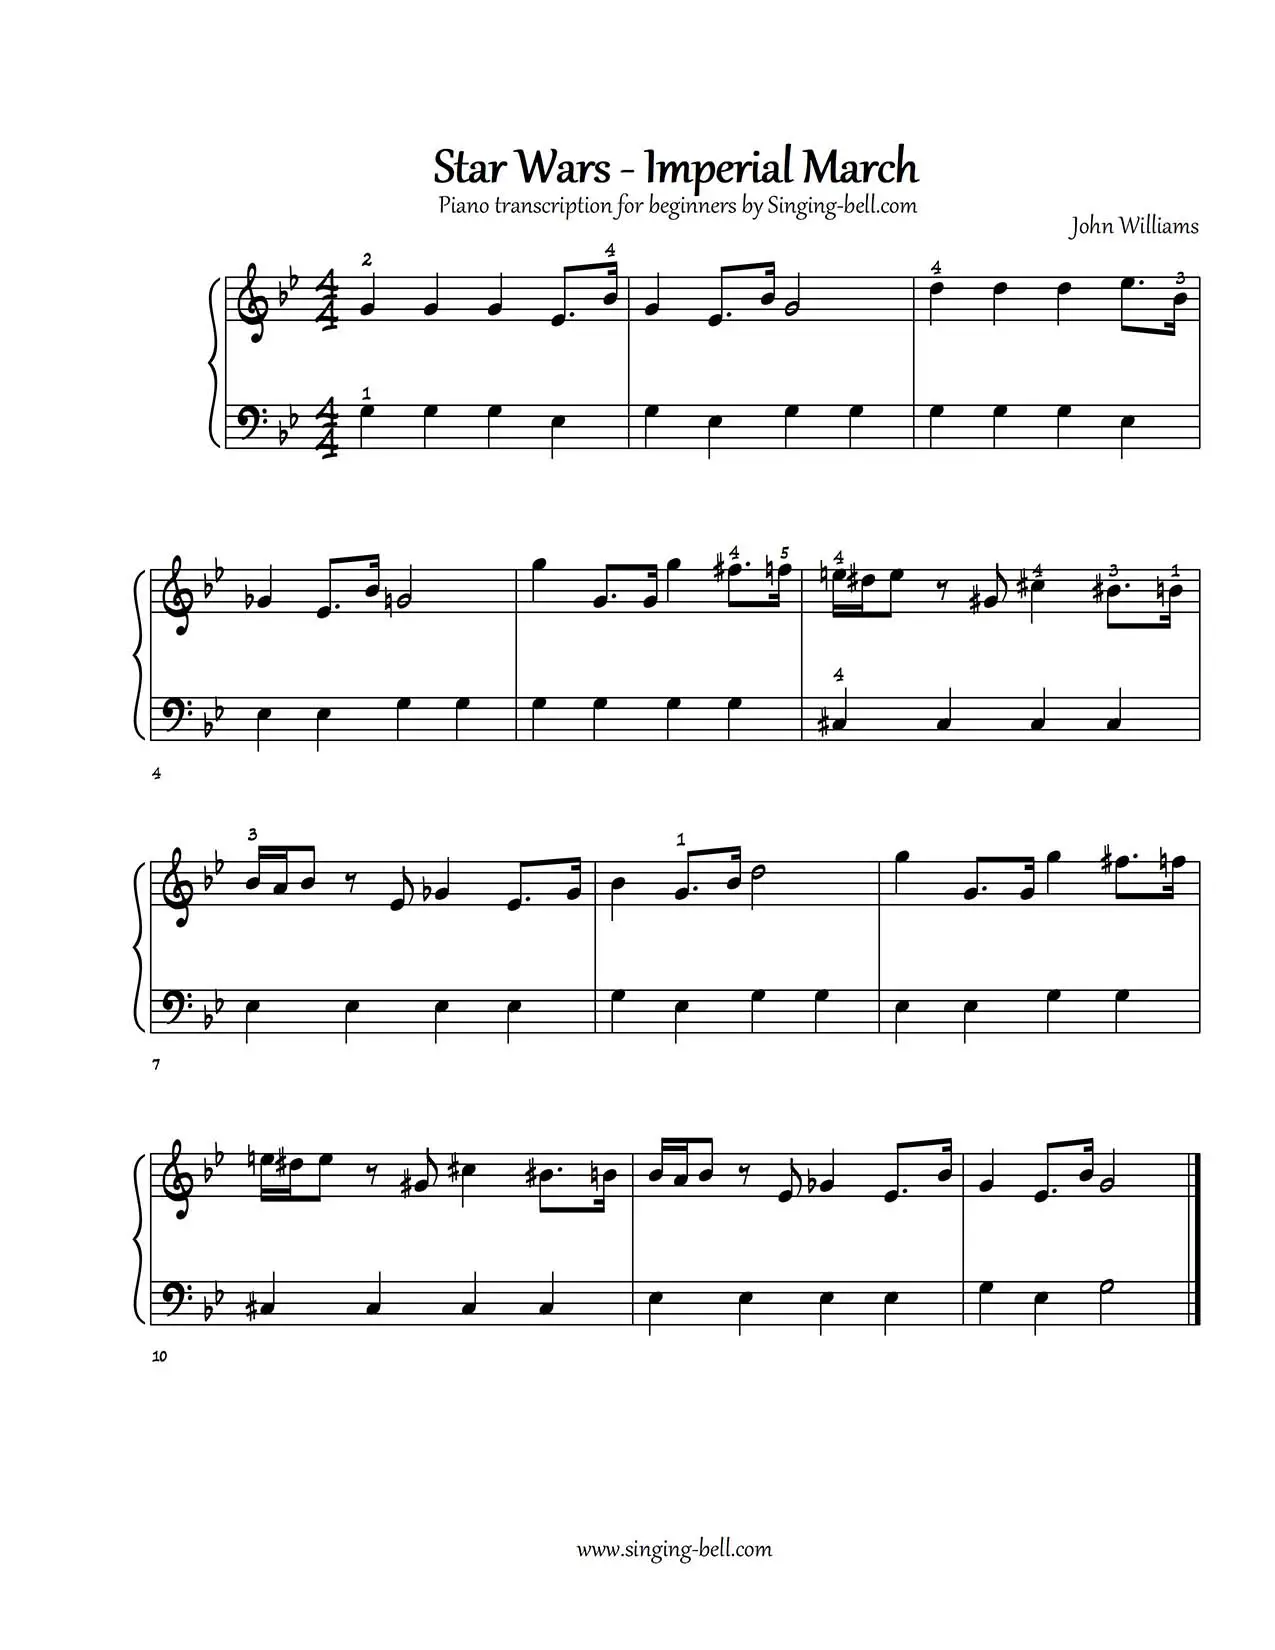 Star Wars Imperial March easy piano sheet music notes beginners pdf